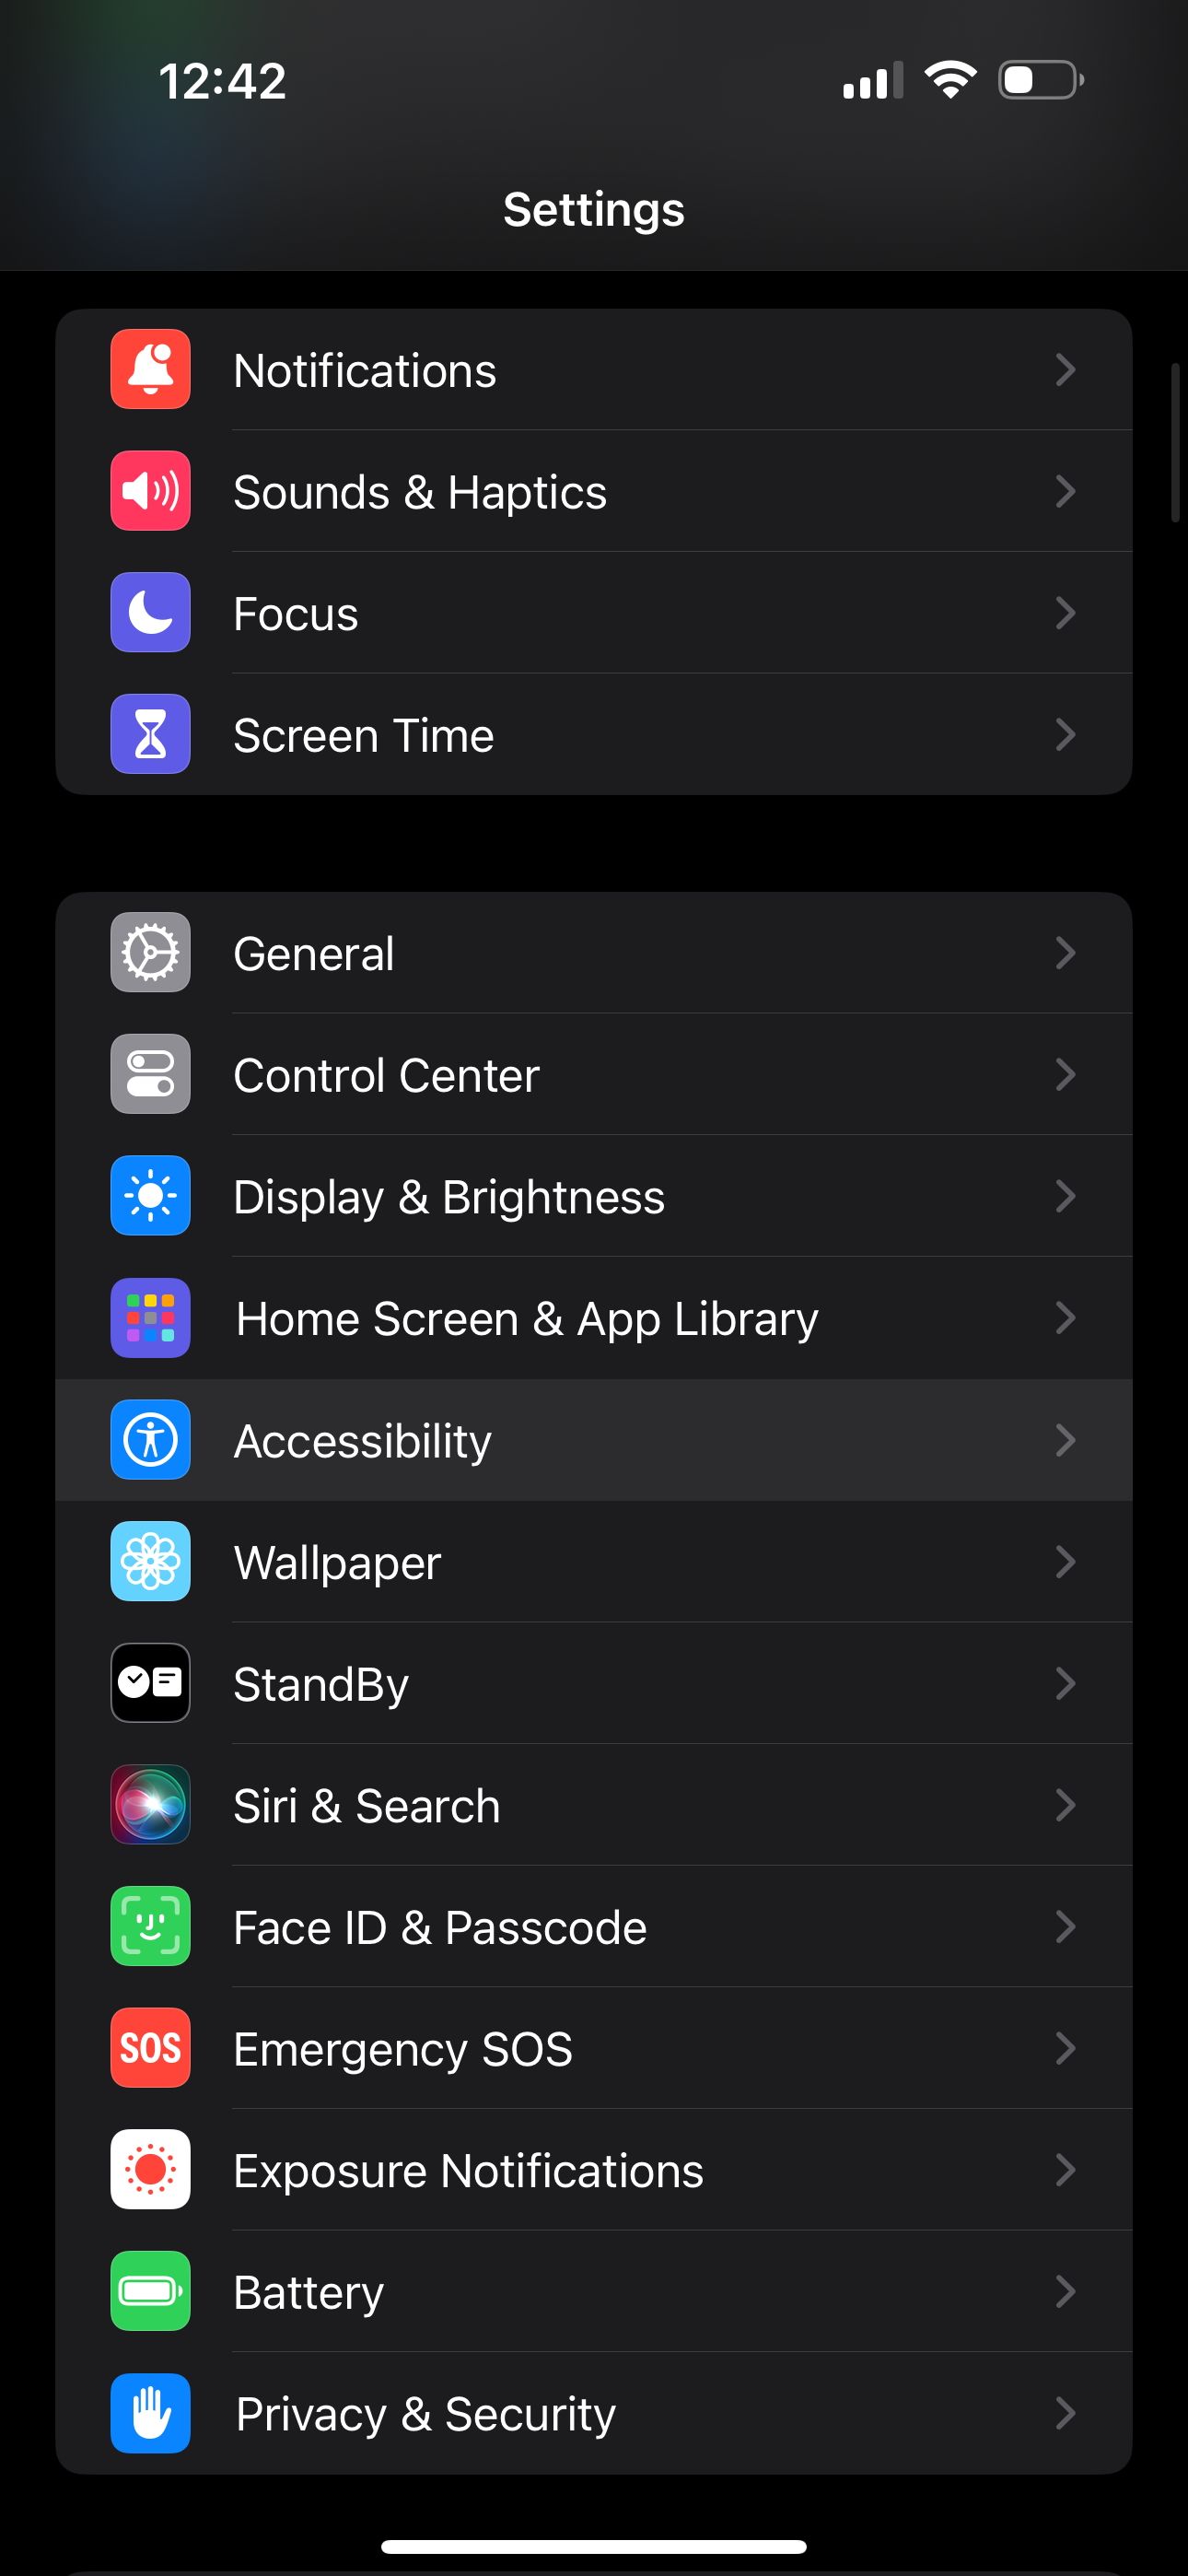 Settings app in iOS with Accessibility highlighted